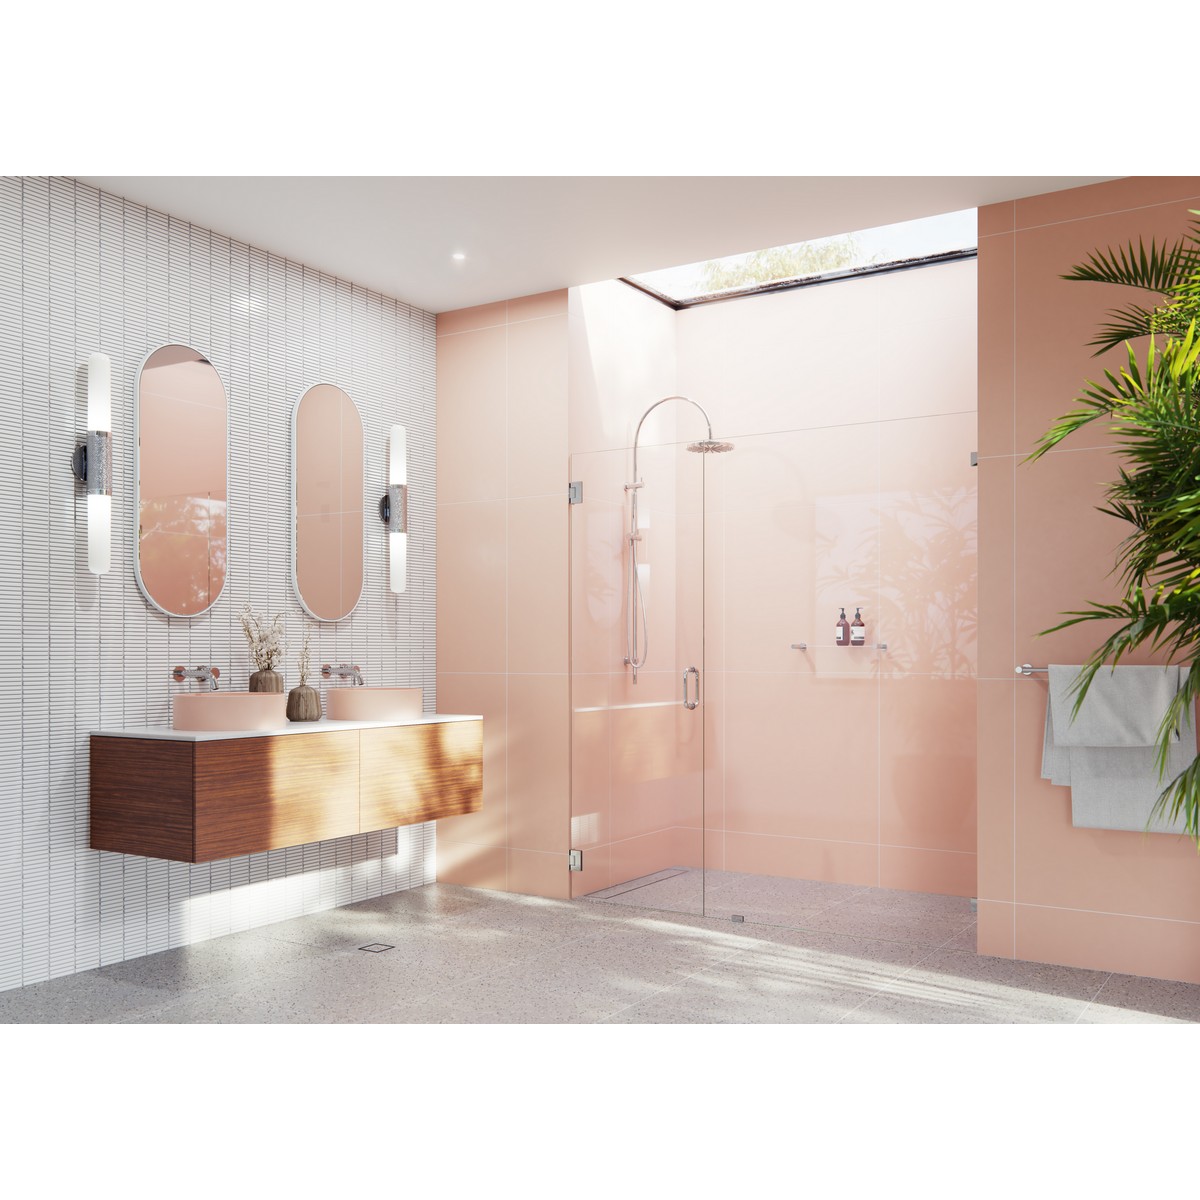 GLASS WAREHOUSE GW-WH-73.25 ILLUME 73 1/4 W X 78 H WALL HINGED FULLY FRAMELESS GLASS SHOWER ENCLOSURE